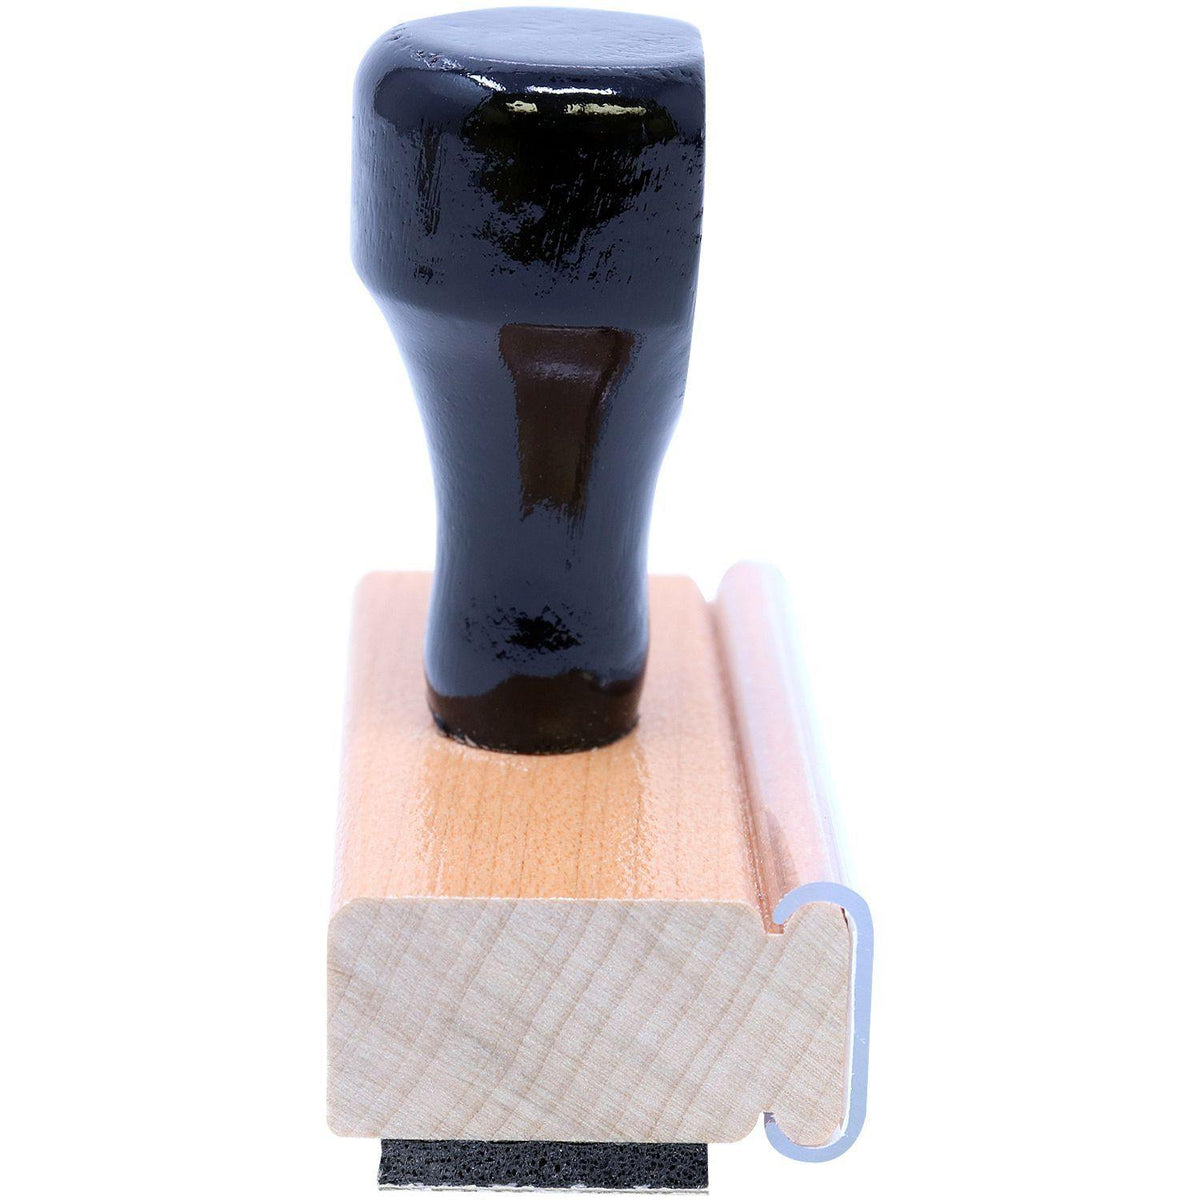 Round Faxed Rubber Stamp - Engineer Seal Stamps - Brand_Acorn, Impression Size_Small, Stamp Type_Regular Stamp, Type of Use_General, Type of Use_Office